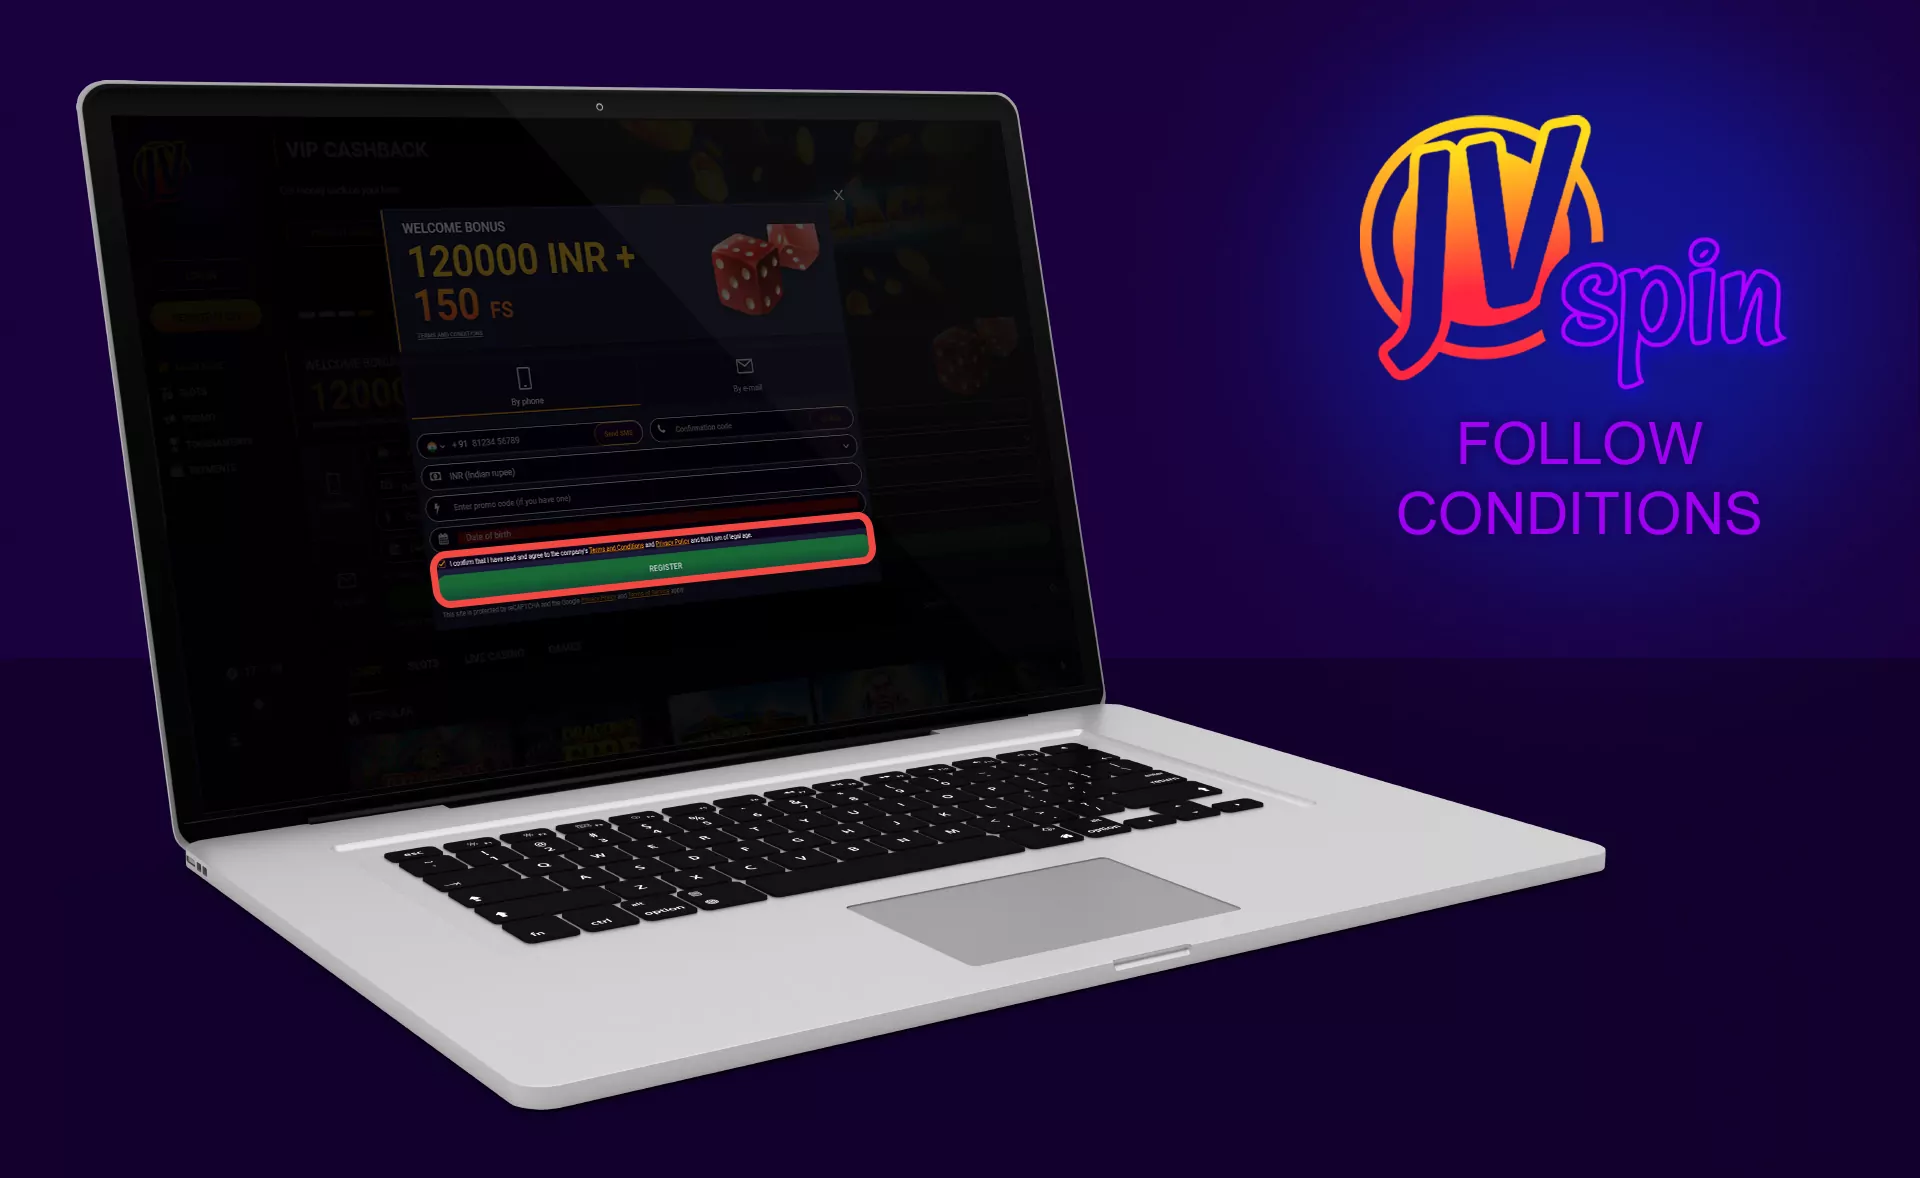 Remember that you are allowed to have only one playing account on the JVSpin Casino.